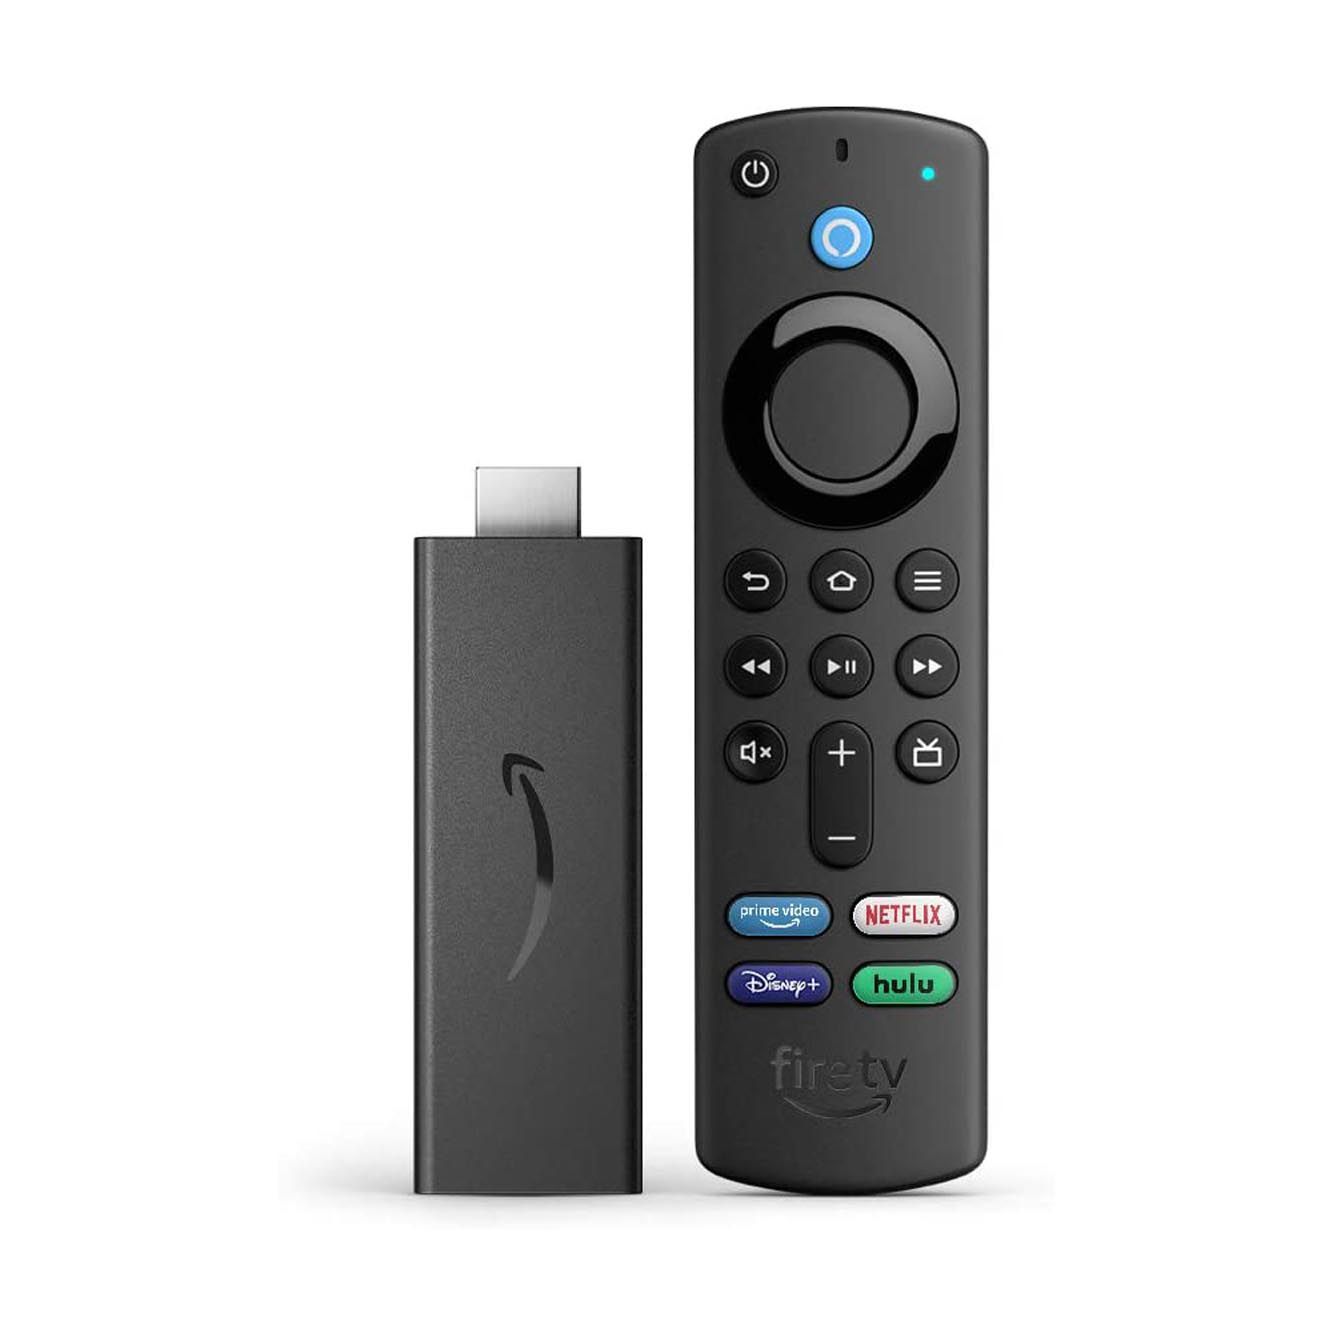 Amazon’s 4K Fire TV Stick comes with free Disney+ subscription in half-off Prime Day deal